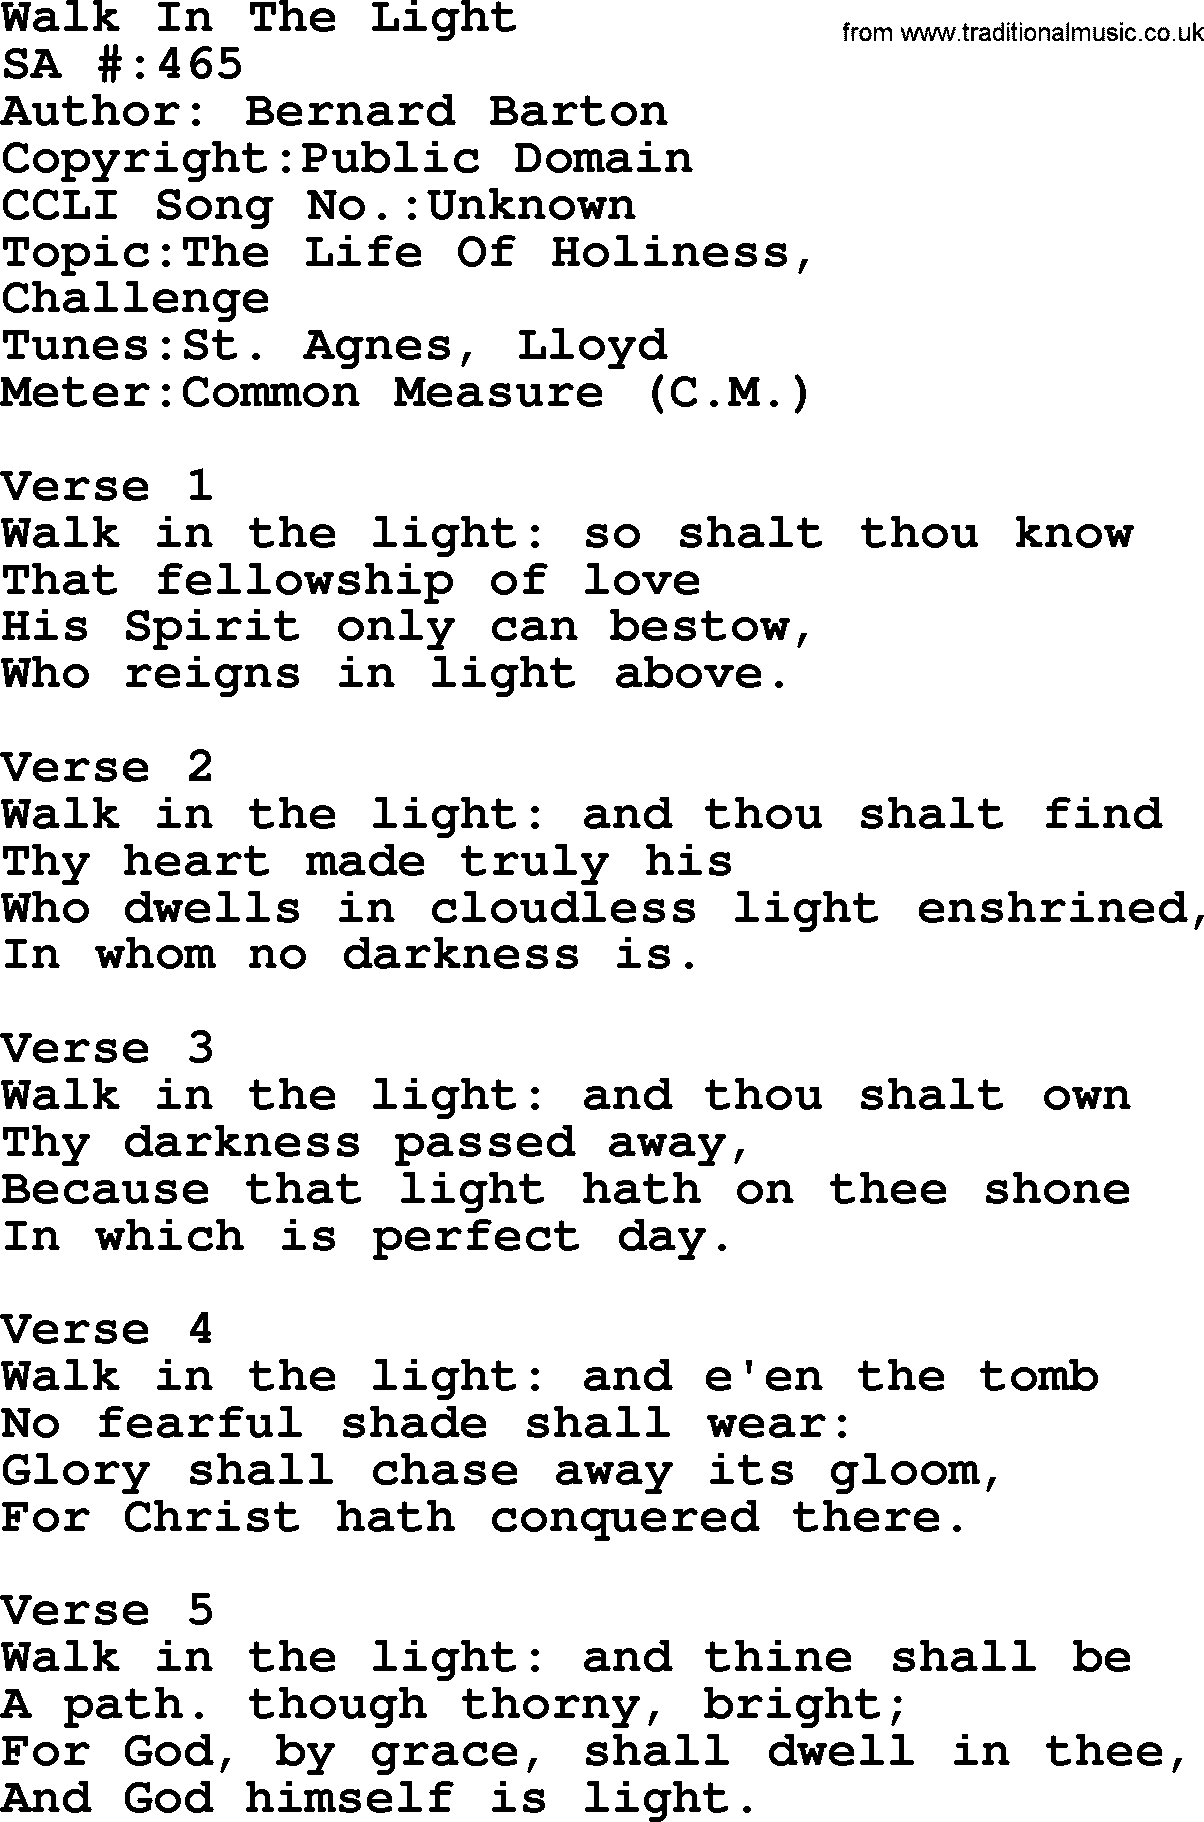 Salvation Army Hymnal, title: Walk In The Light, with lyrics and PDF,